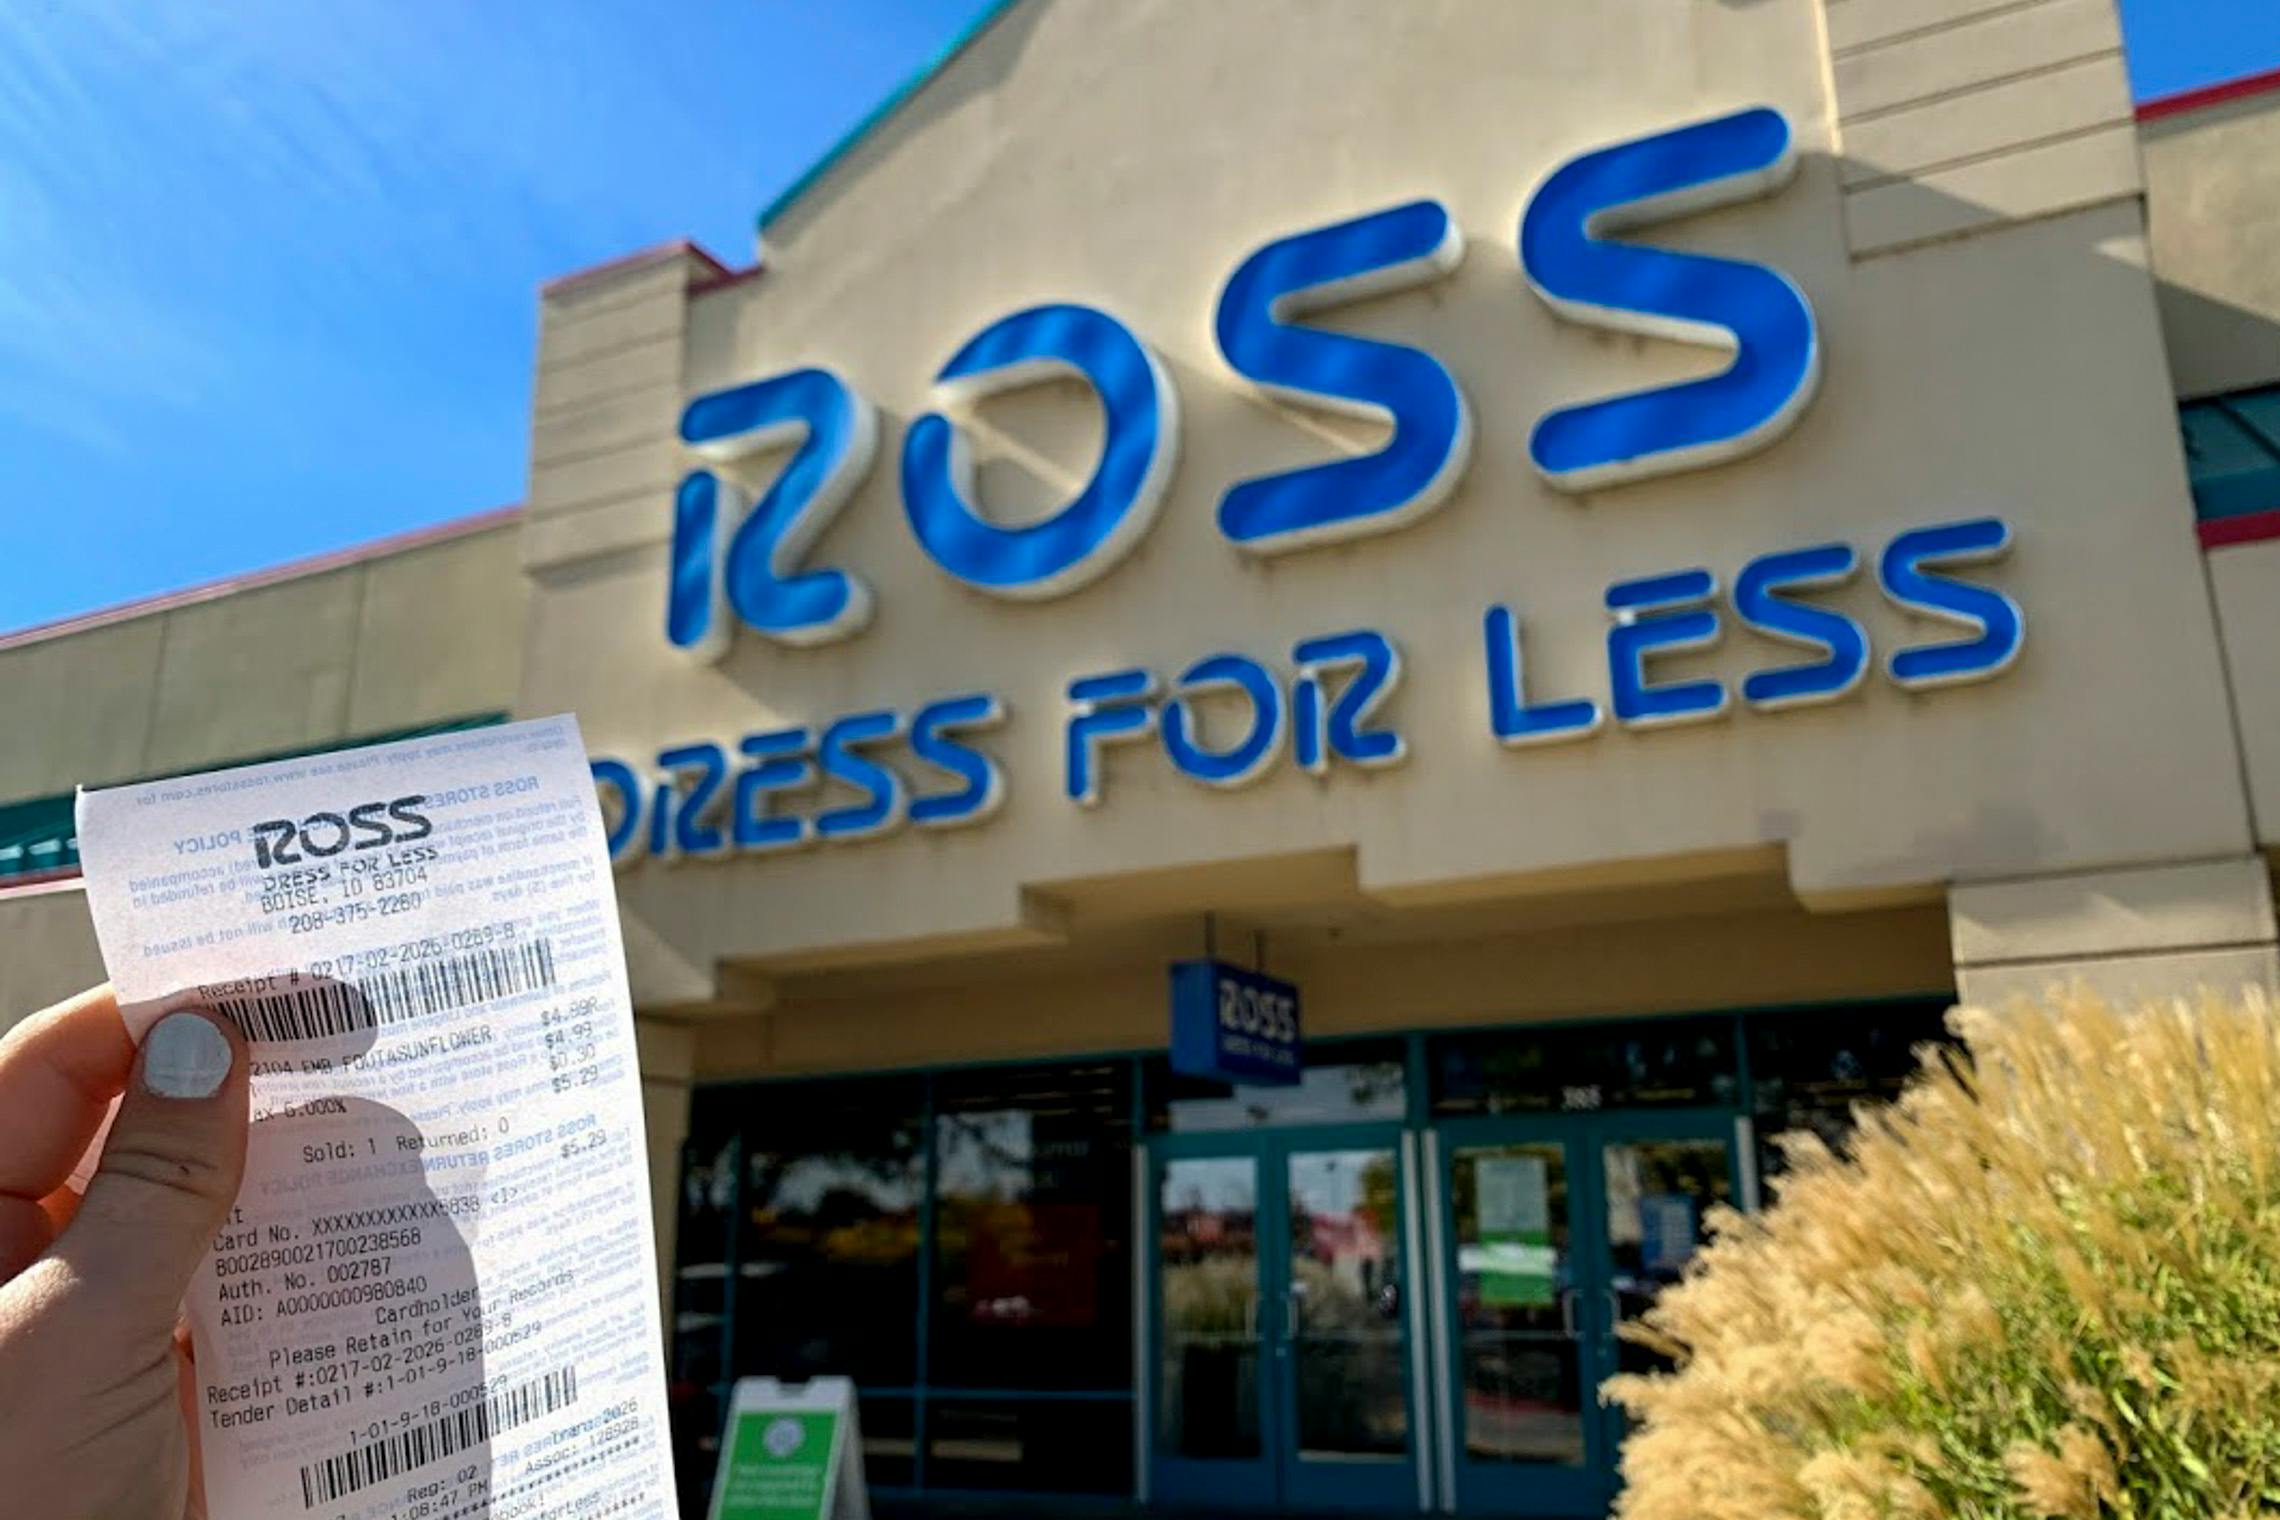 Ross Return Policy Here's What to Know The Krazy Coupon Lady